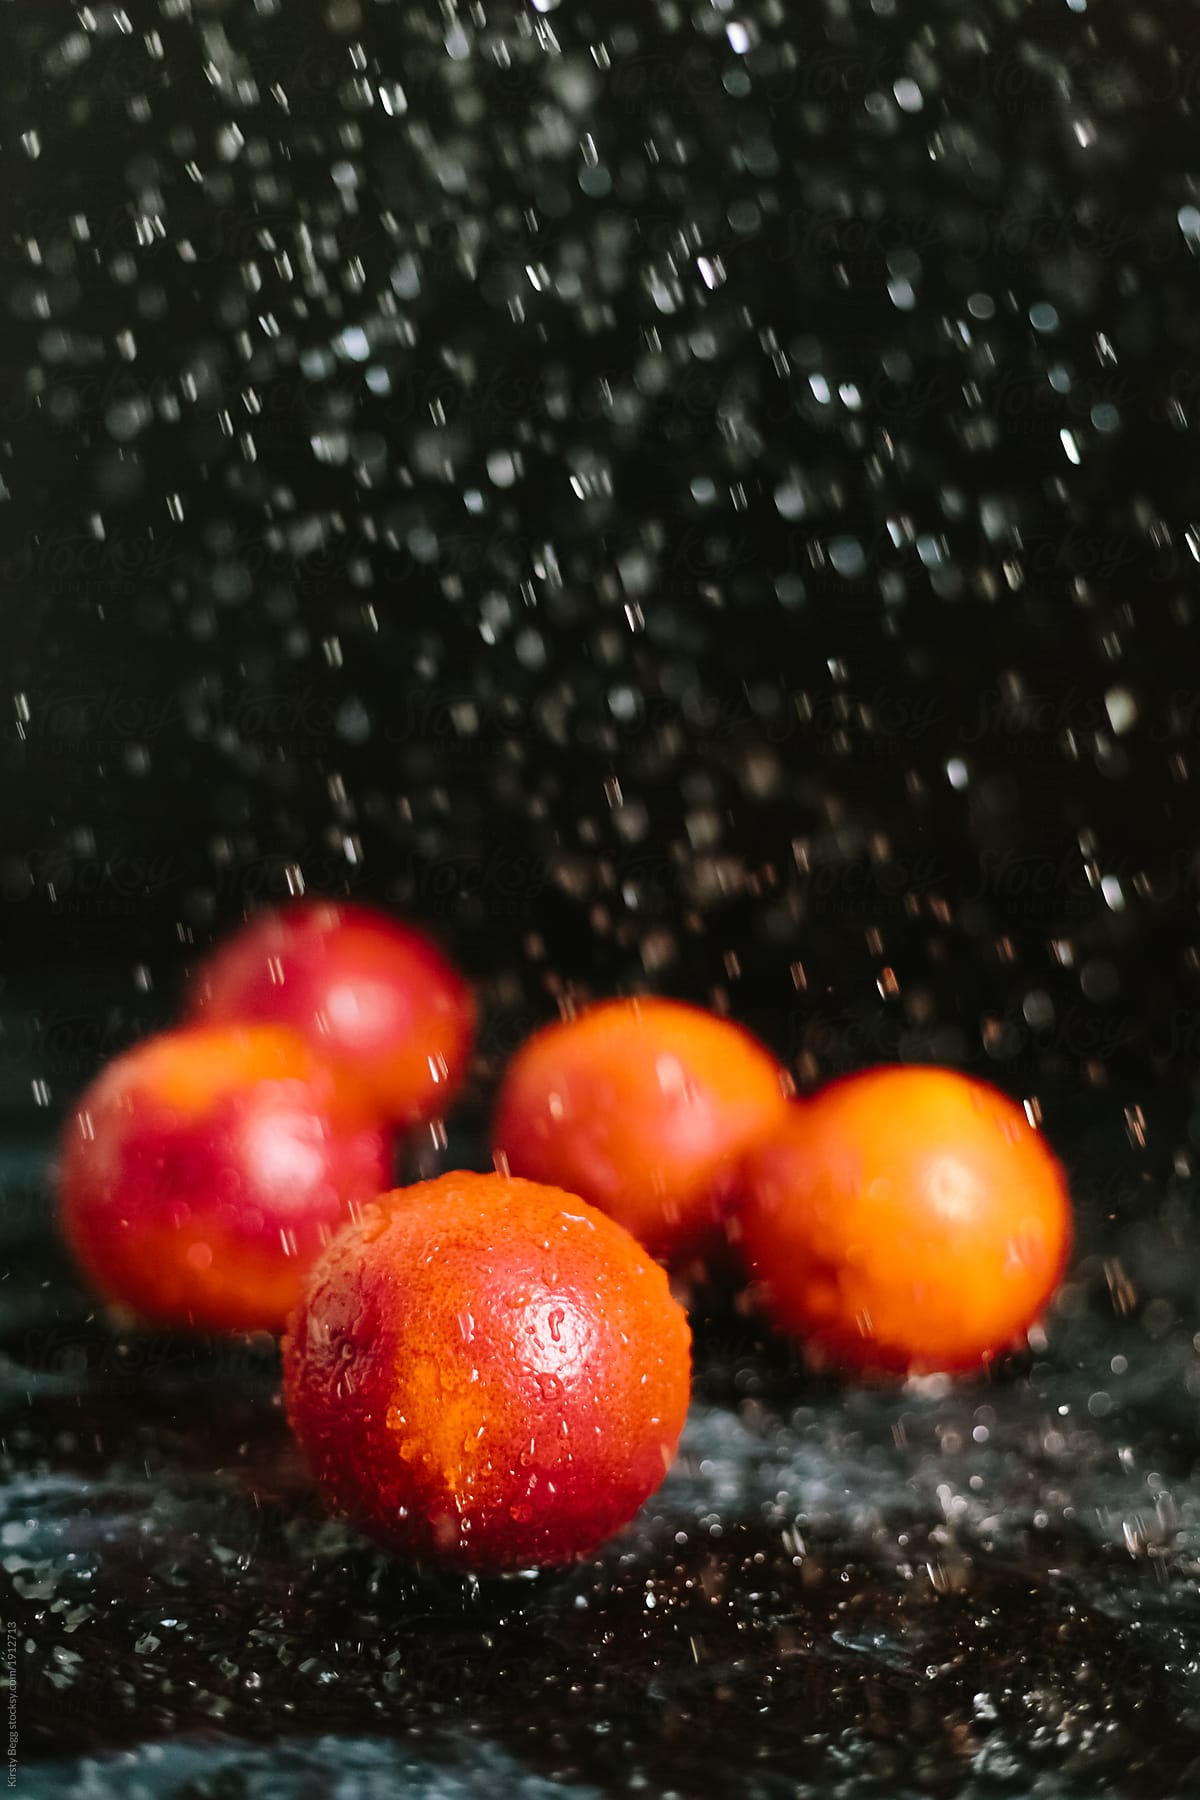 Water droplets falling onto whole red oranges